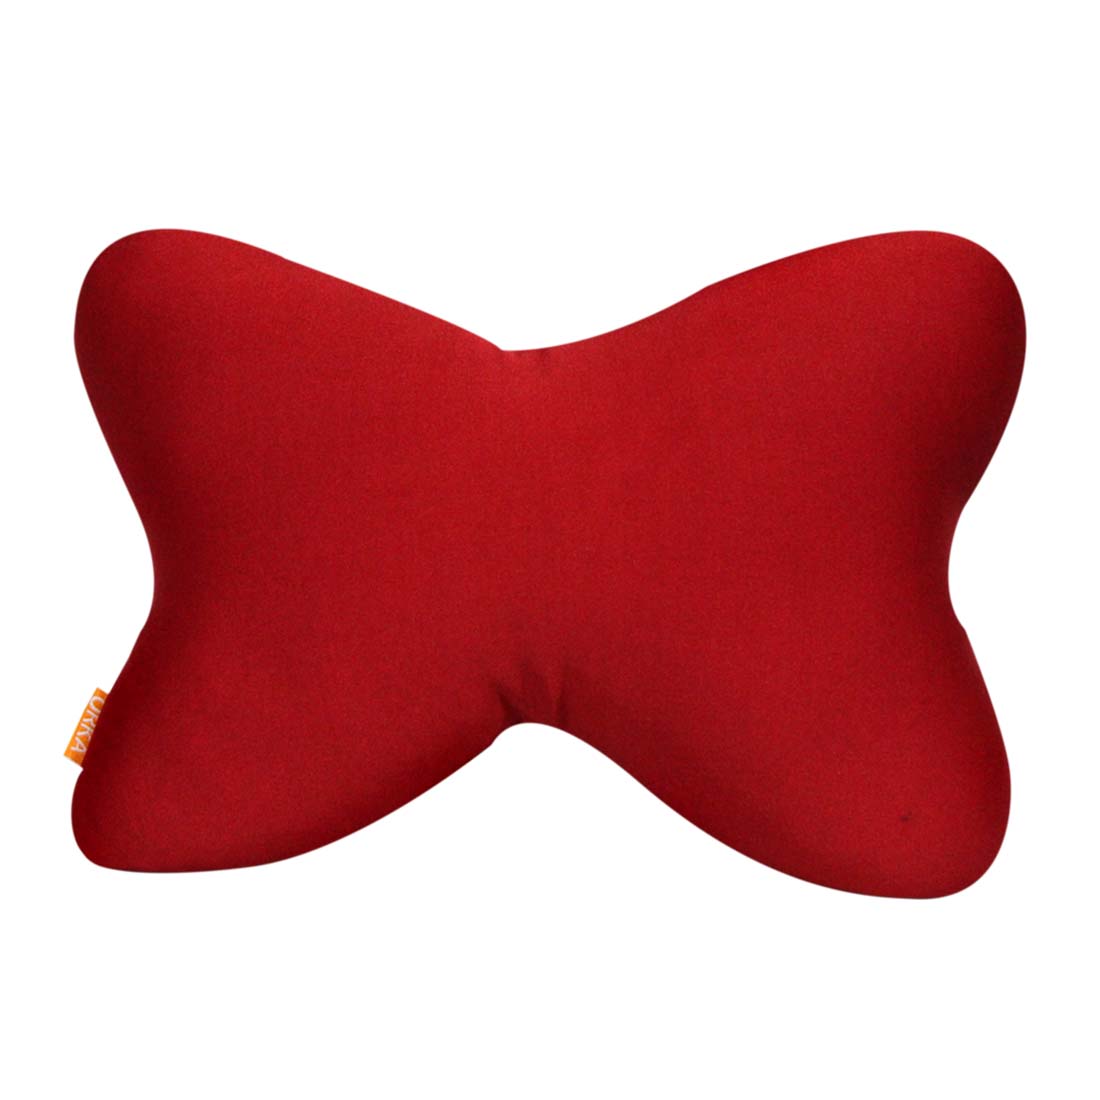 ORKA Classic Car Neckrest Pillow Filled With Microbeads [Pack Of 2] - Red  